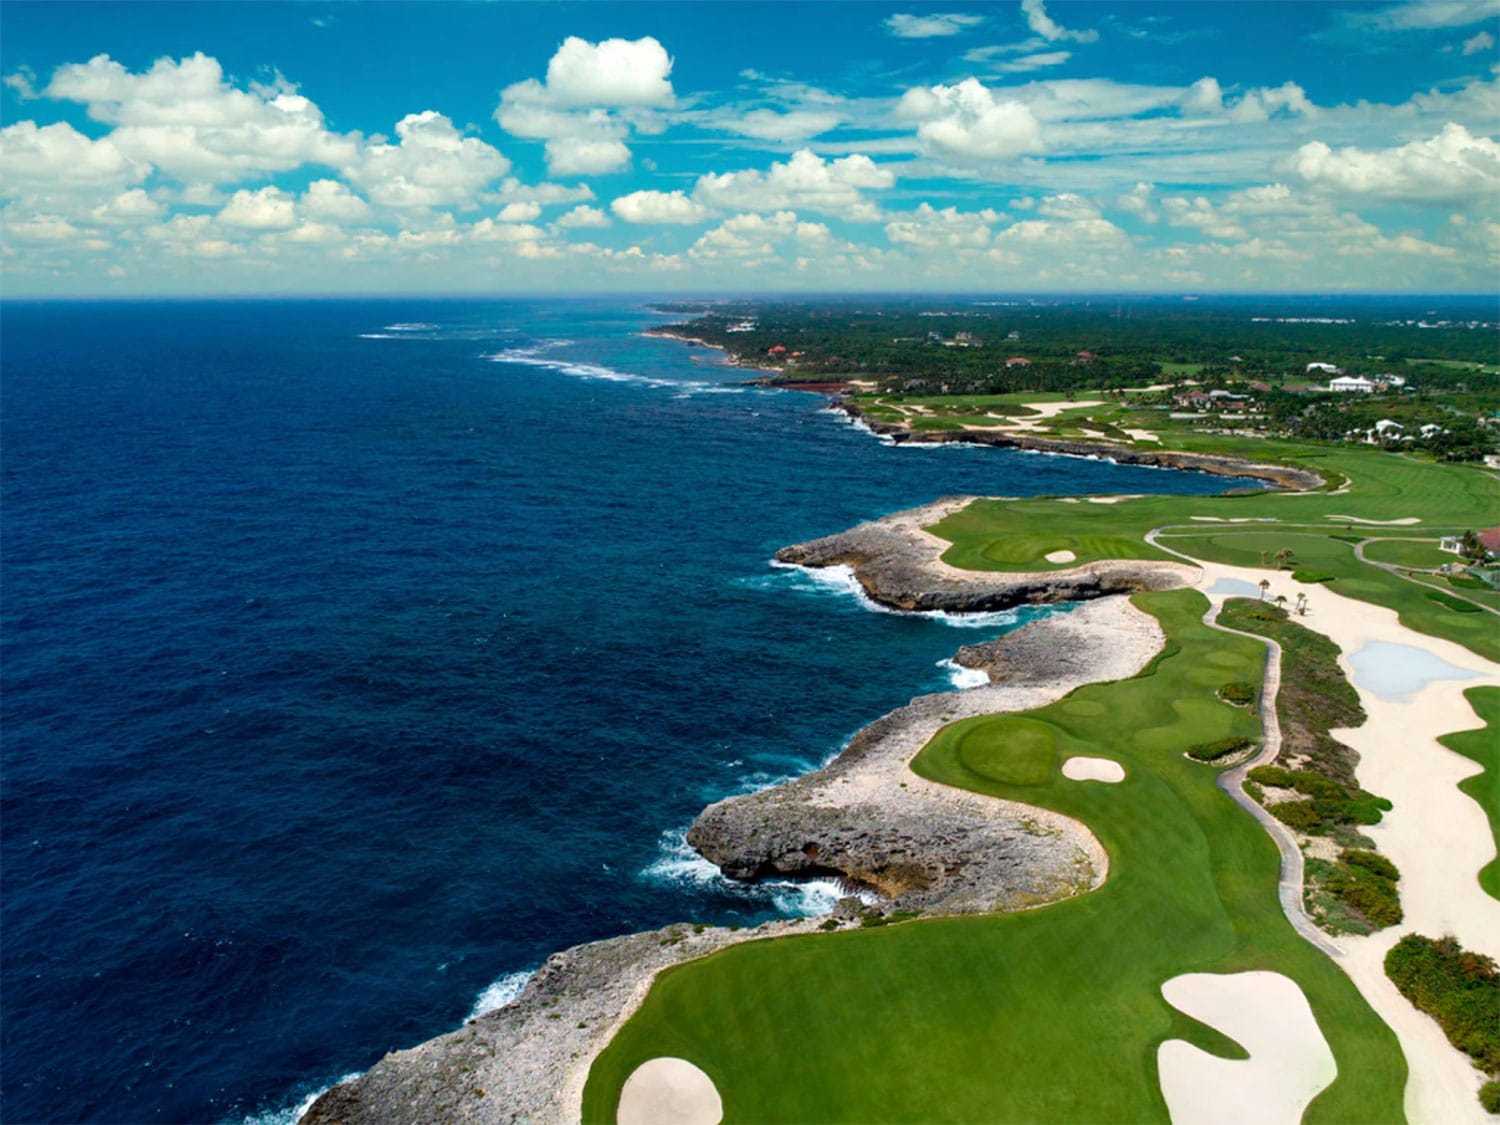 An aerial view of the Corales Golf Club in Punta Cana, Dominican Republic.